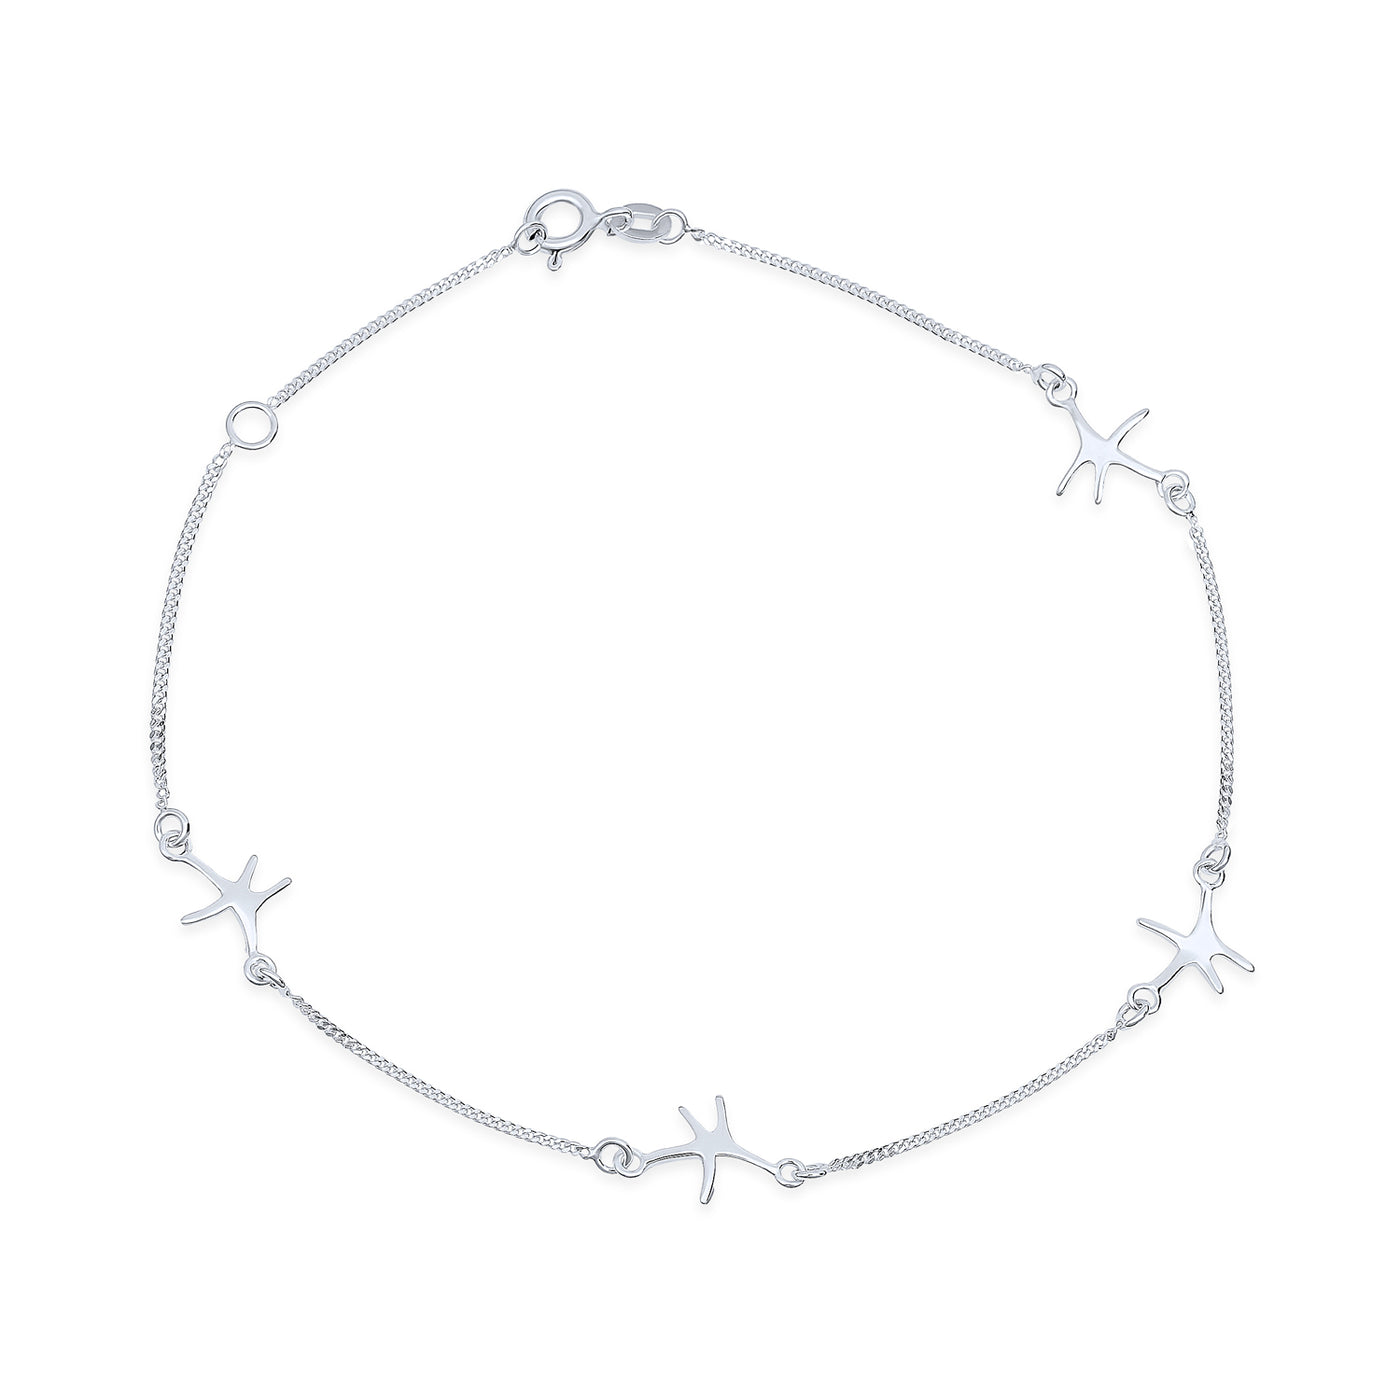 Nautical 4 Starfish Anklet Ankle Bracelet .925 Sterling Silver 9 Inch